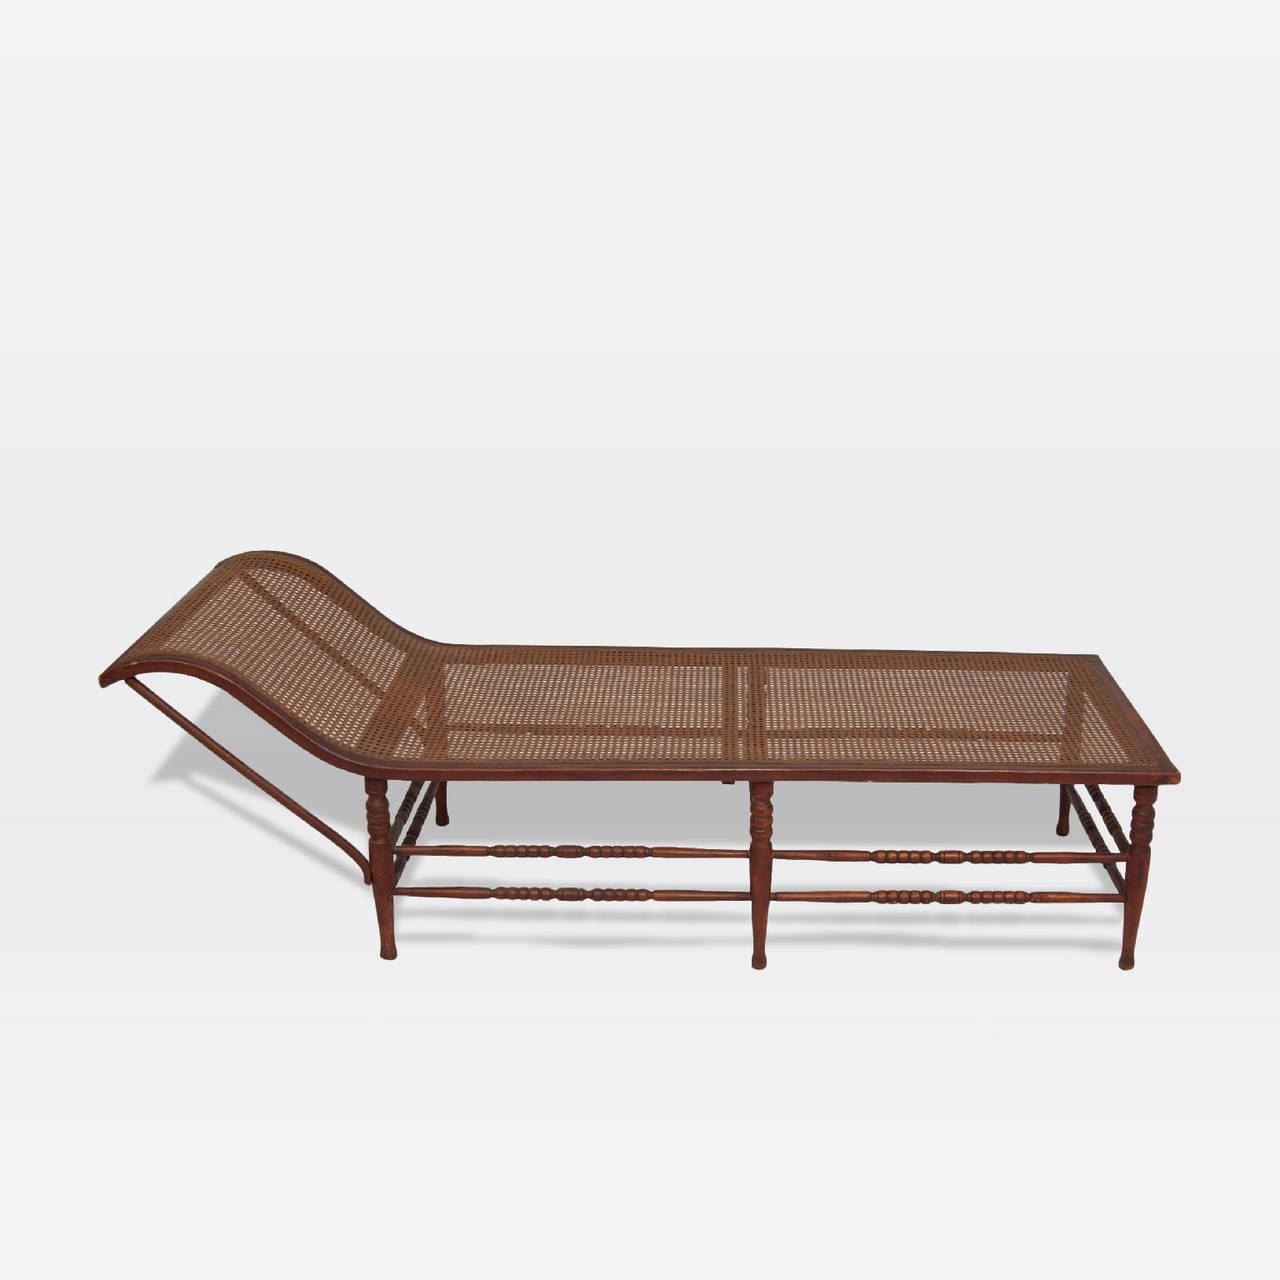 Dutch Colonial solid rosewood daybed with six turned legs and caned seat.